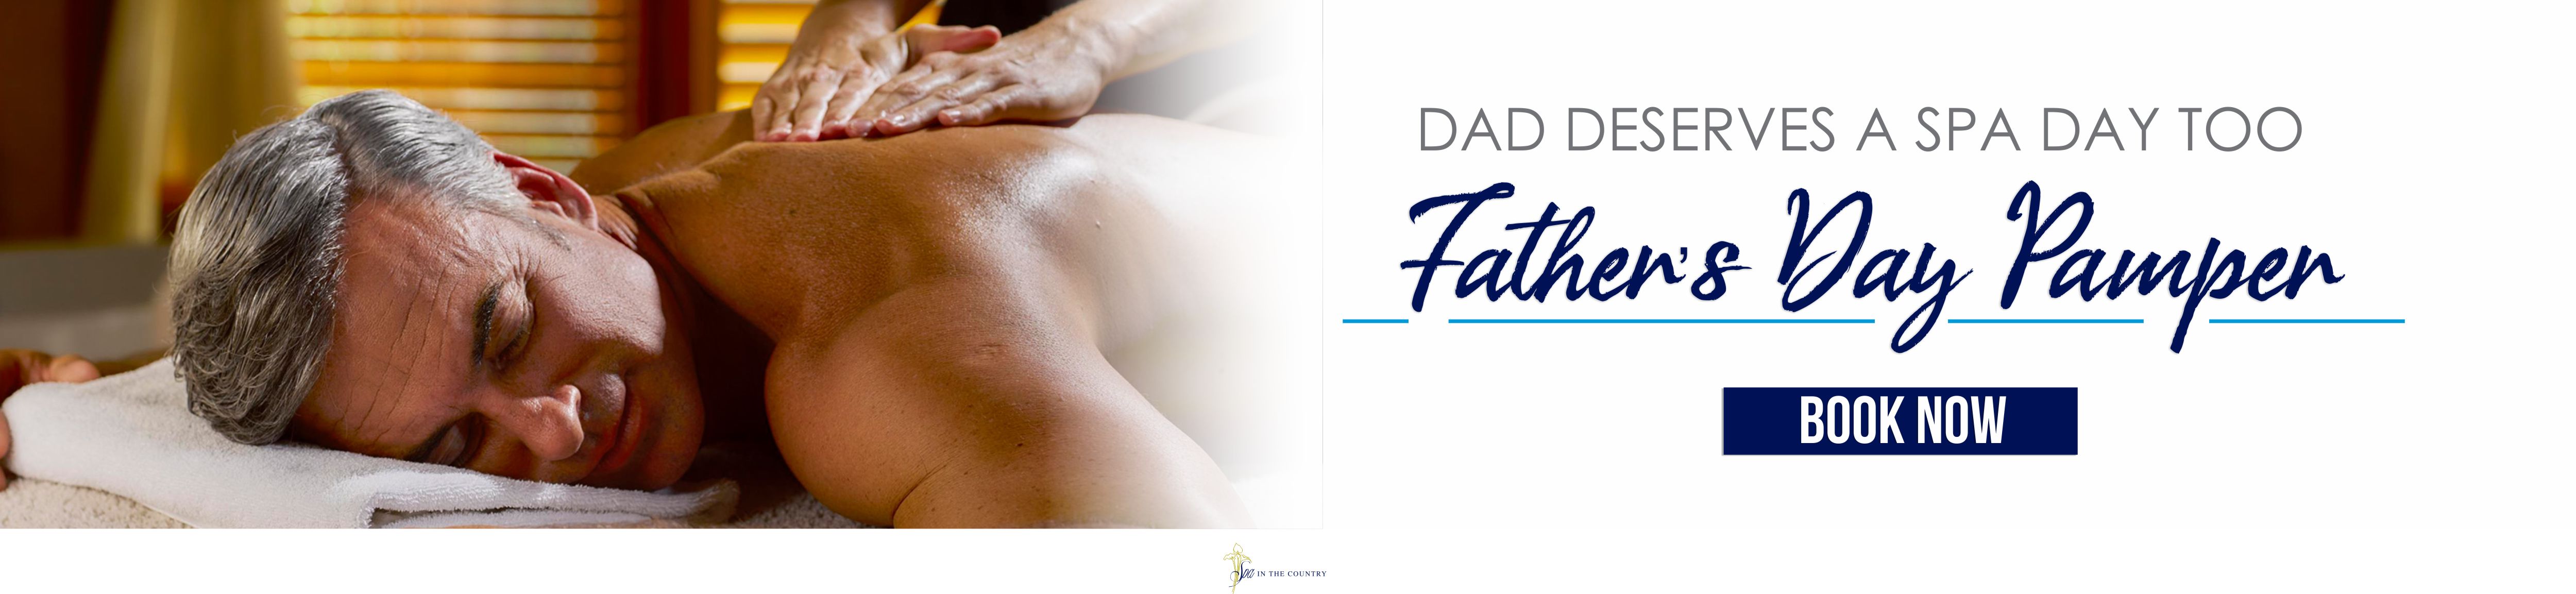 Spa in the Country Fathers Day Treatment Packages for Spas in Gauteng & Rustenburg